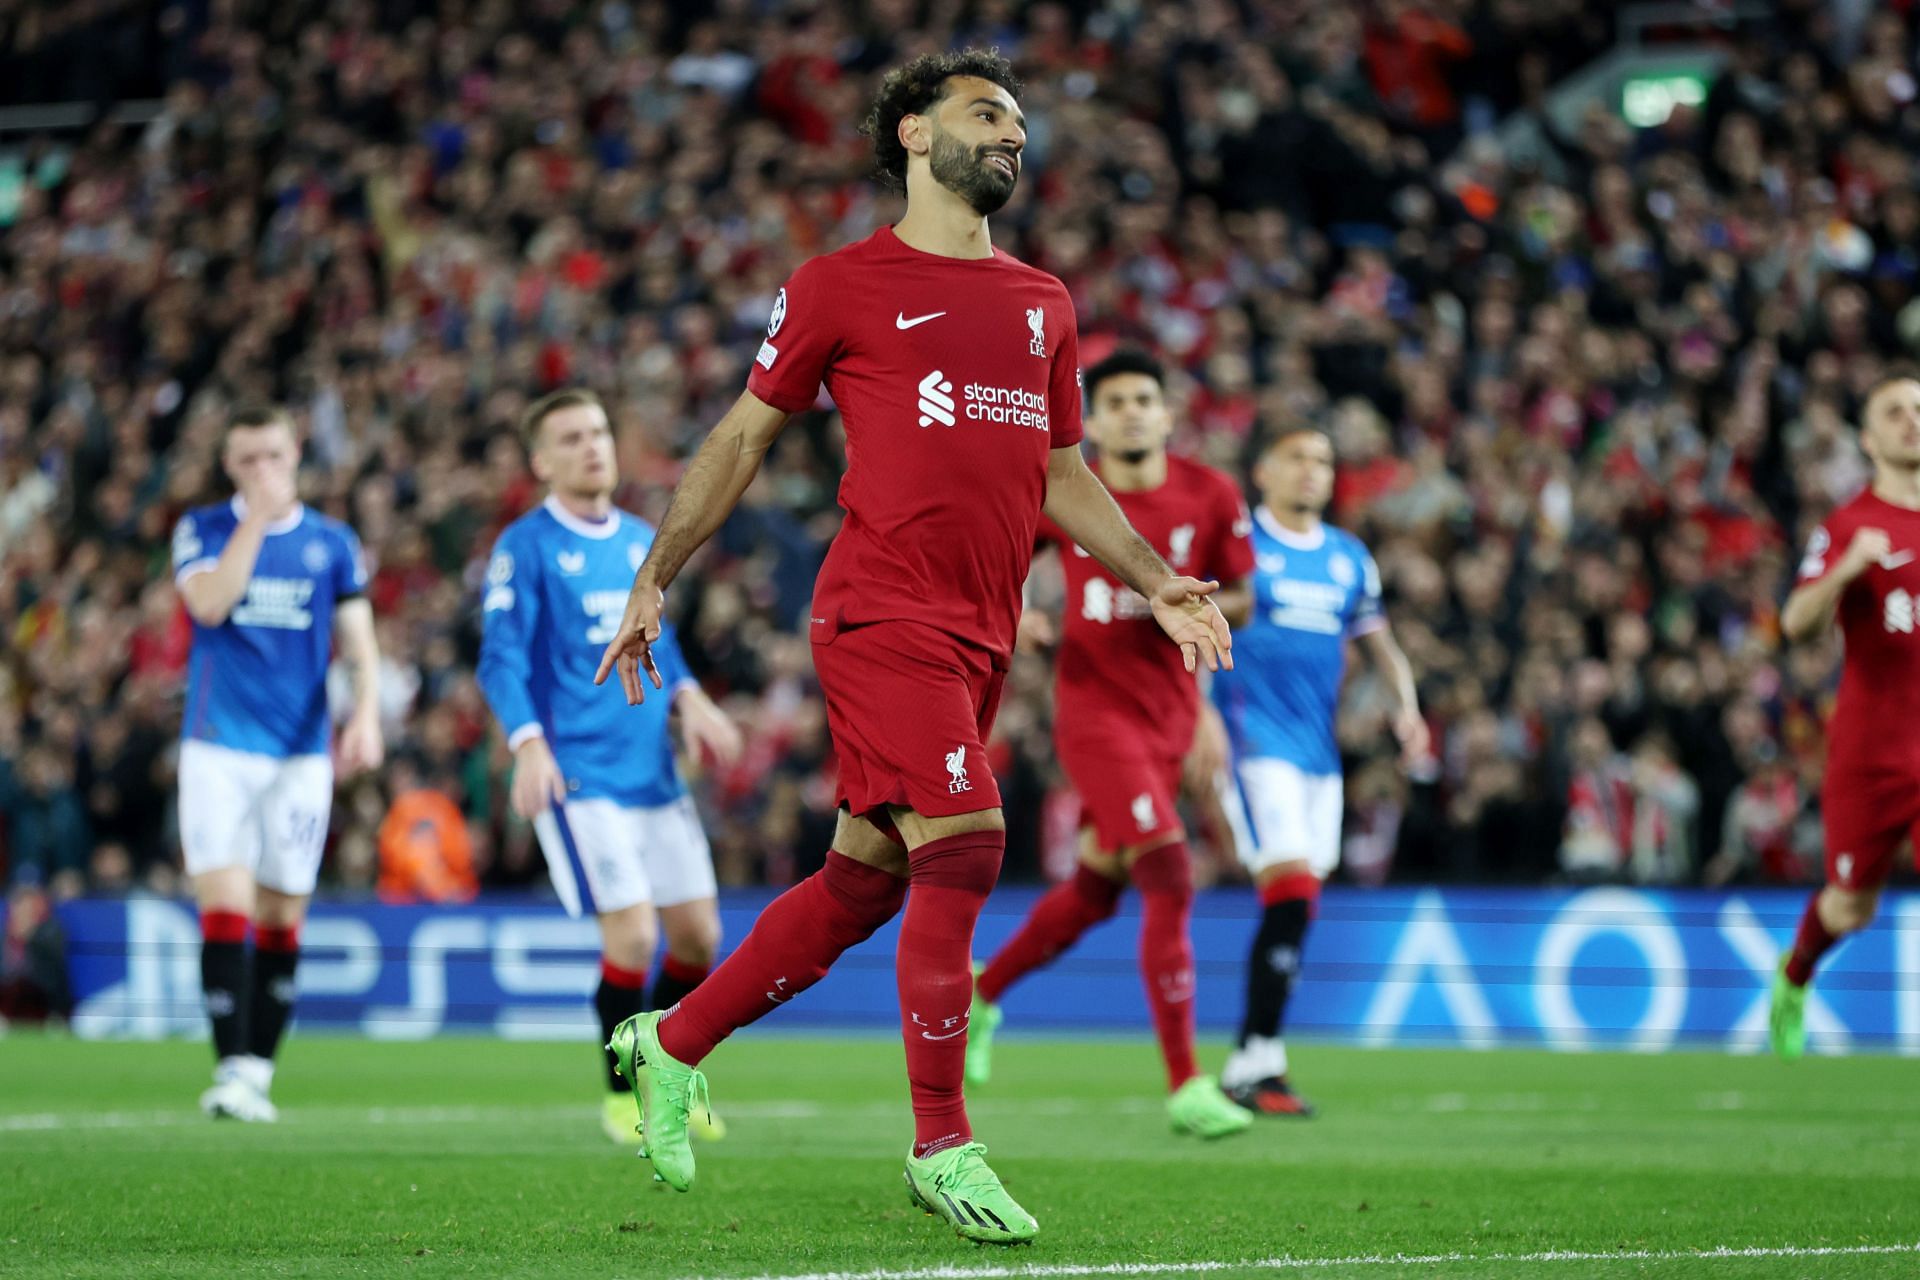 Mohamed Salah will look to find his top form against the Gunners